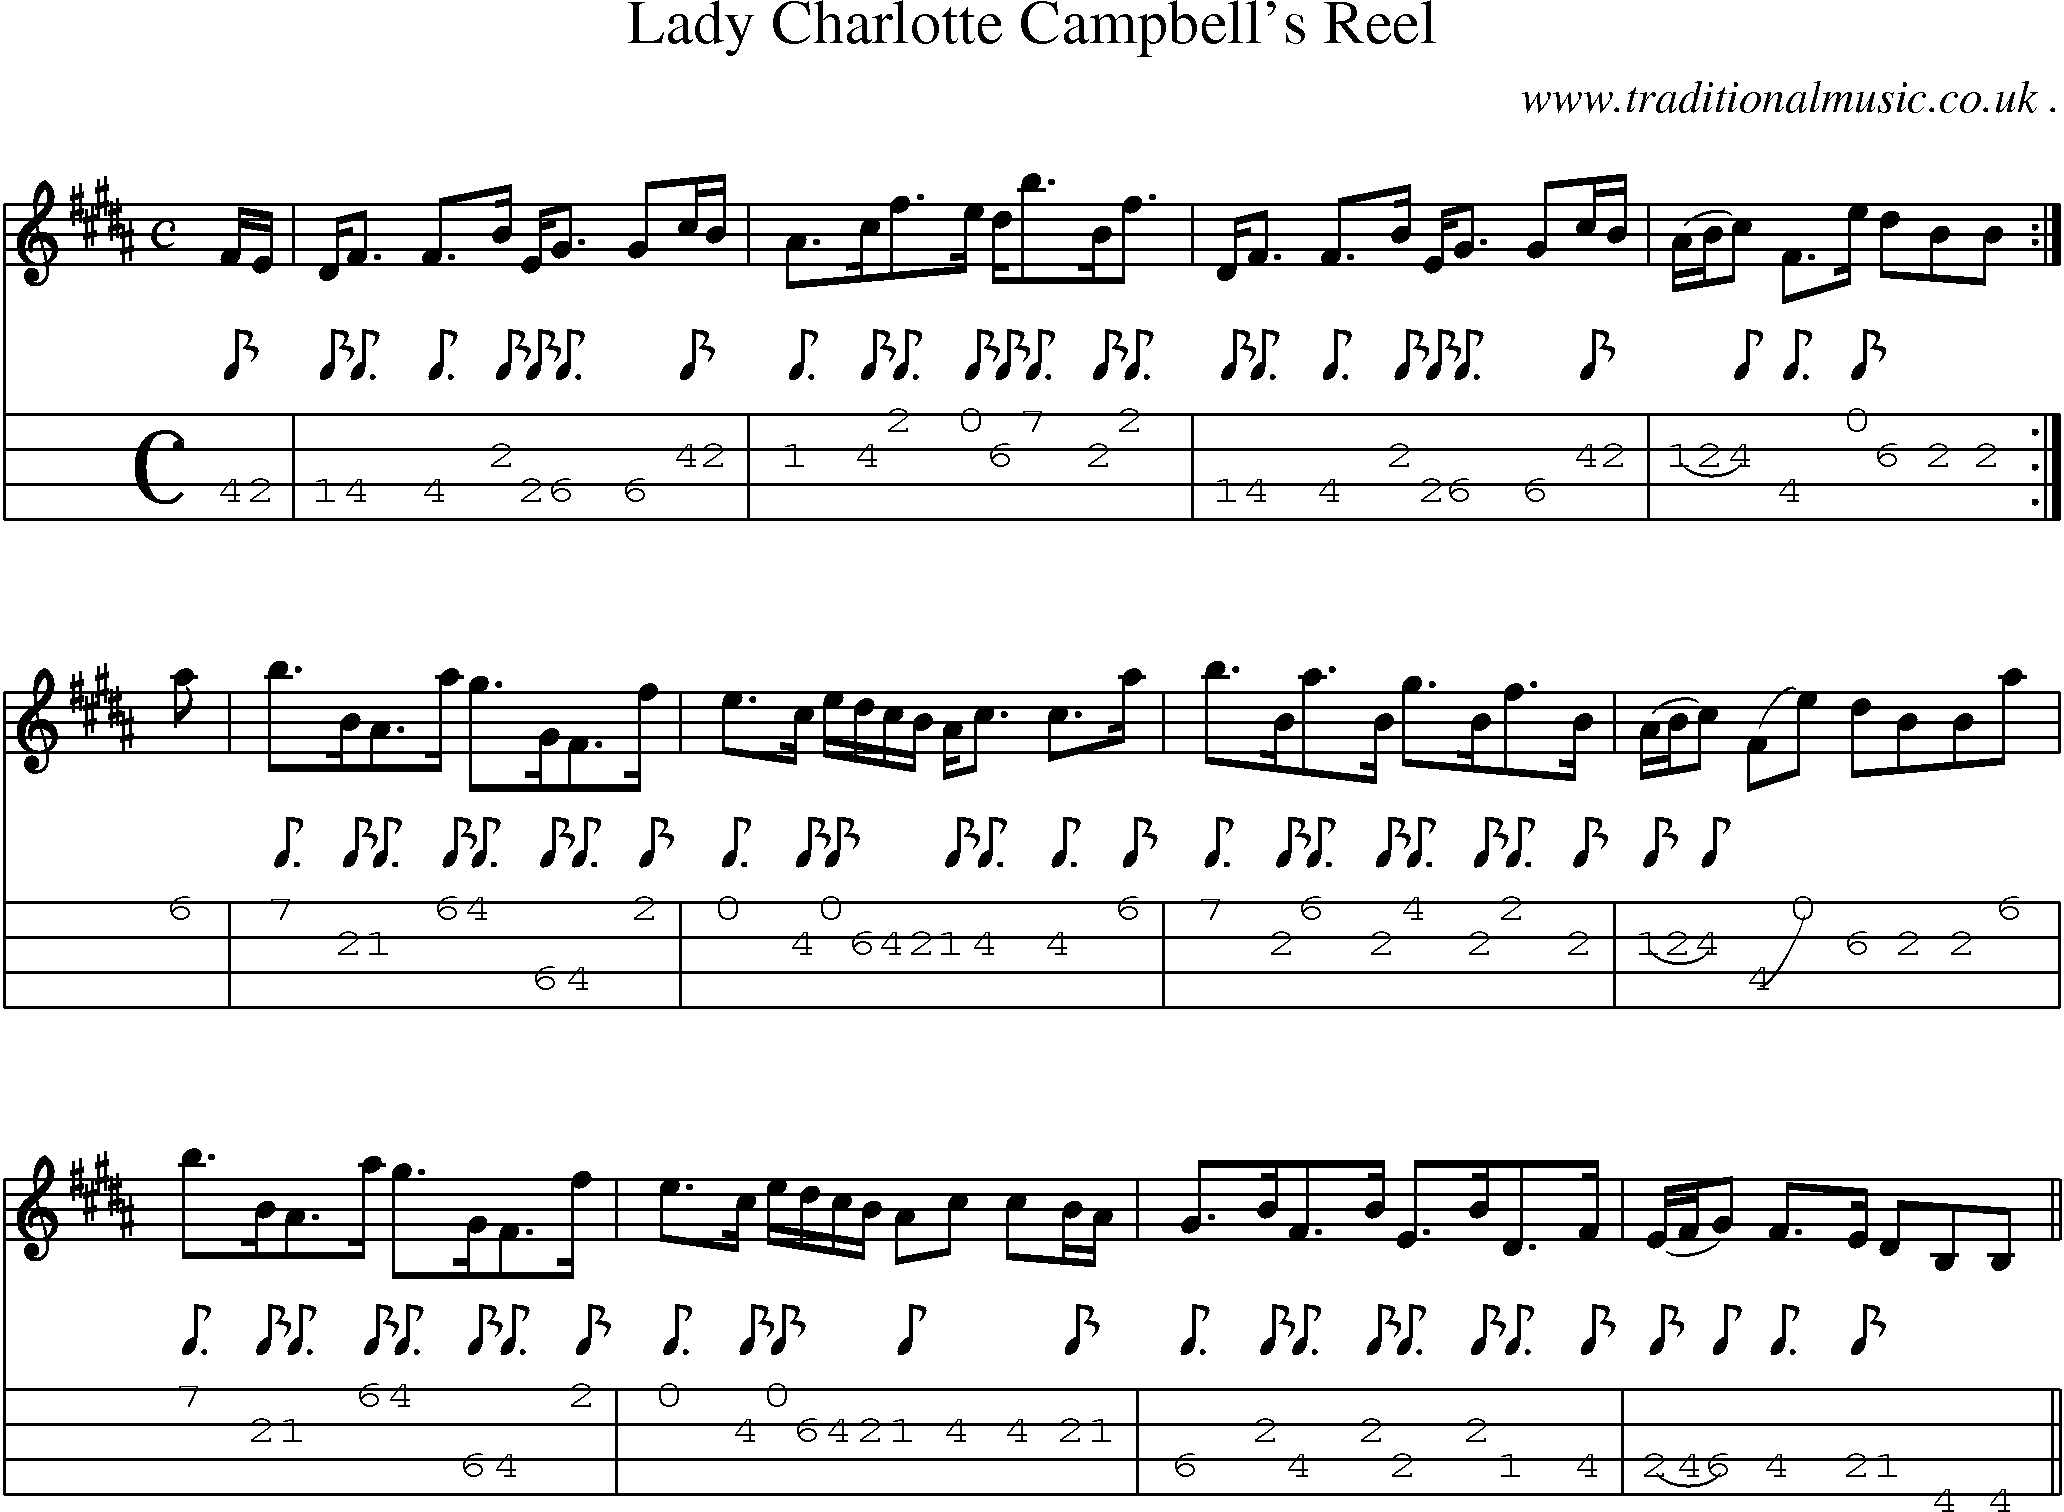 Sheet-music  score, Chords and Mandolin Tabs for Lady Charlotte Campbells Reel